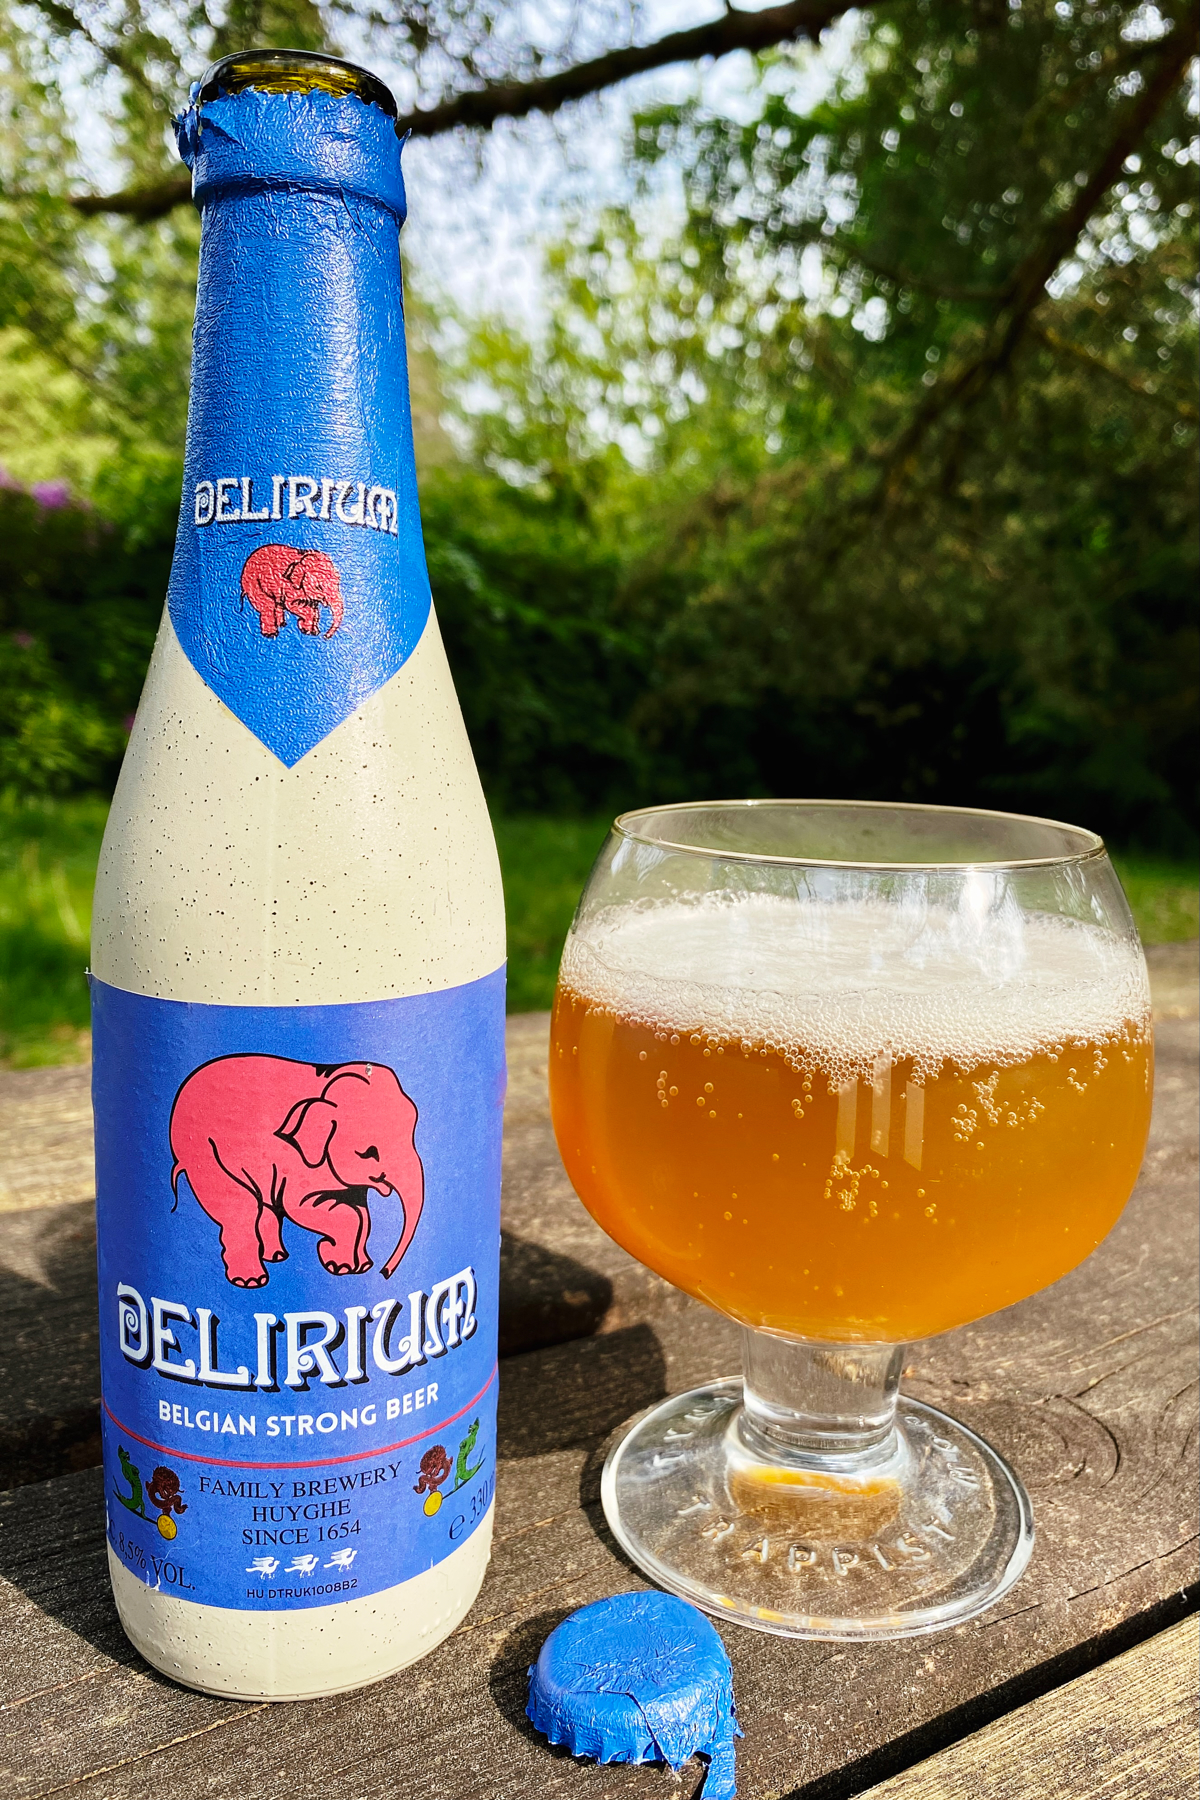 Colourful bottle with pink elephant on label next to a glass of pale golden beer